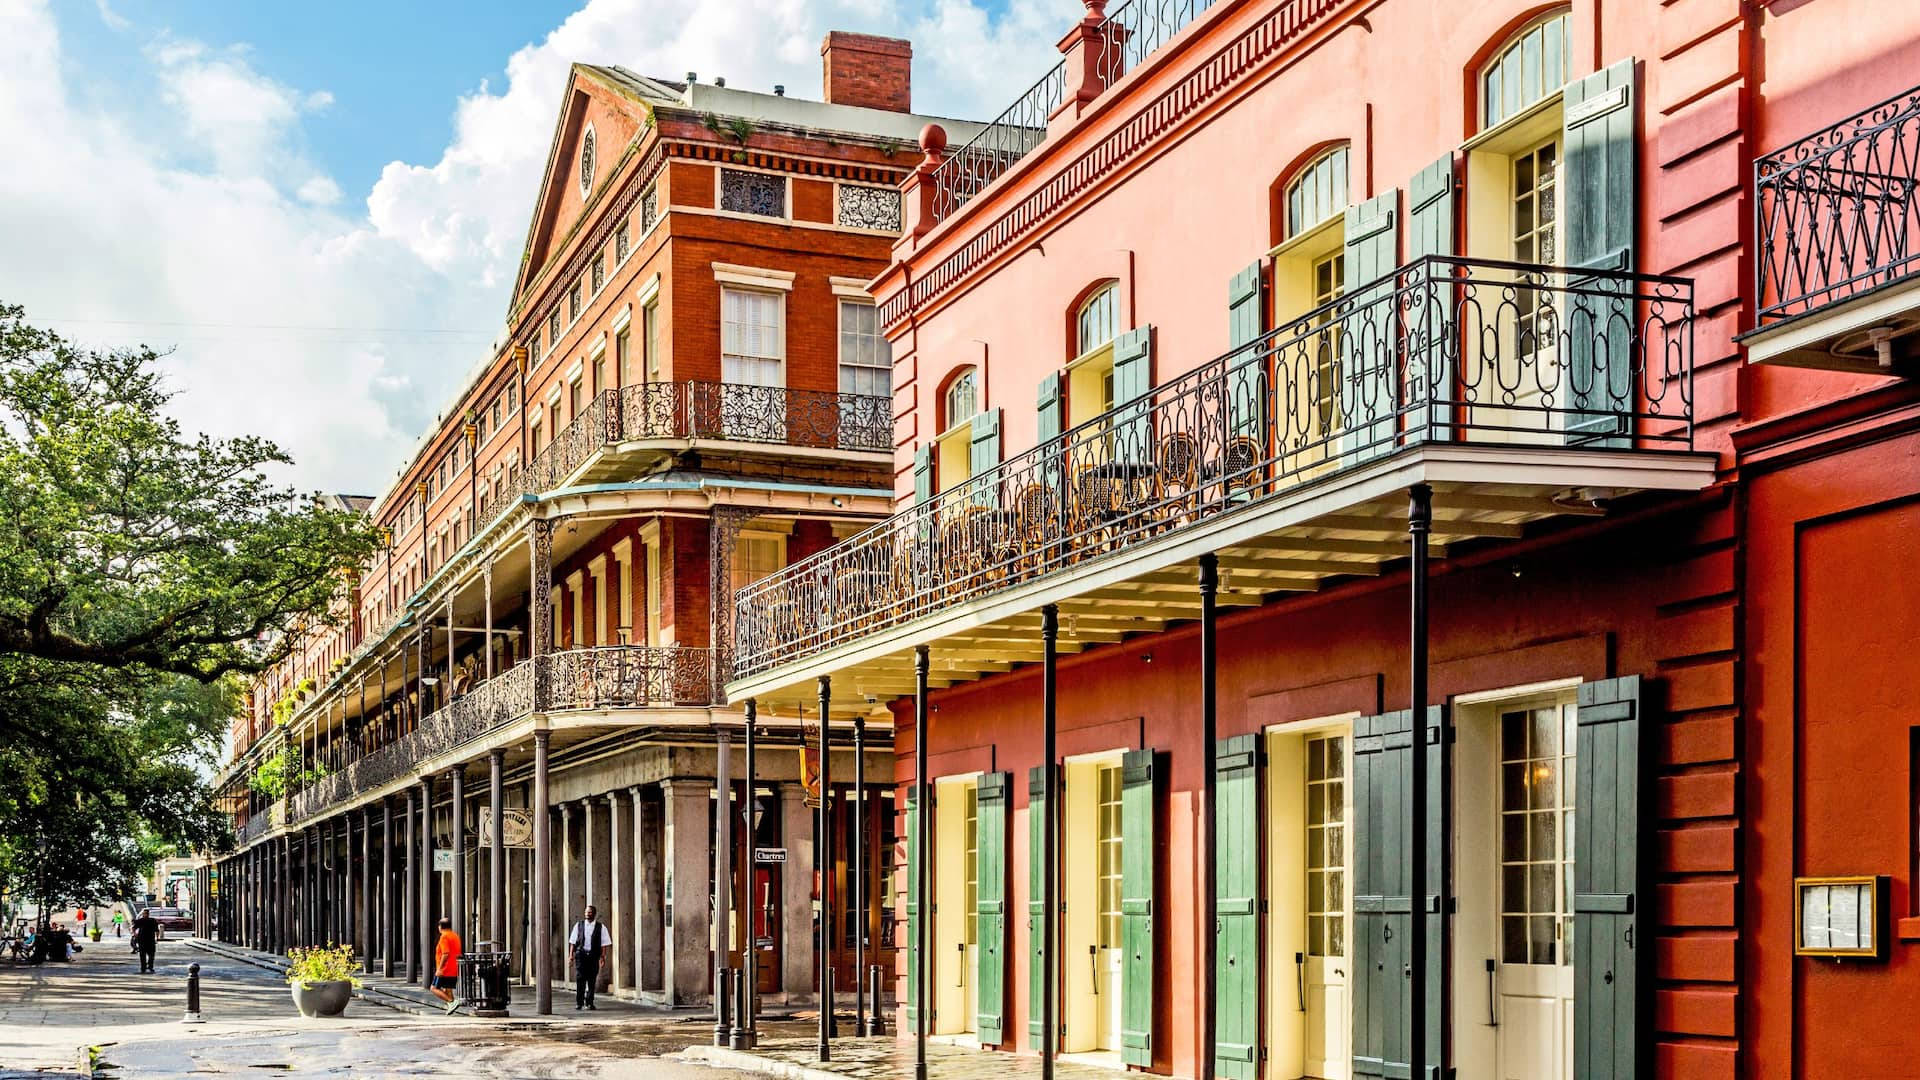 Vibrant Pastel Buildings In The French Quarter